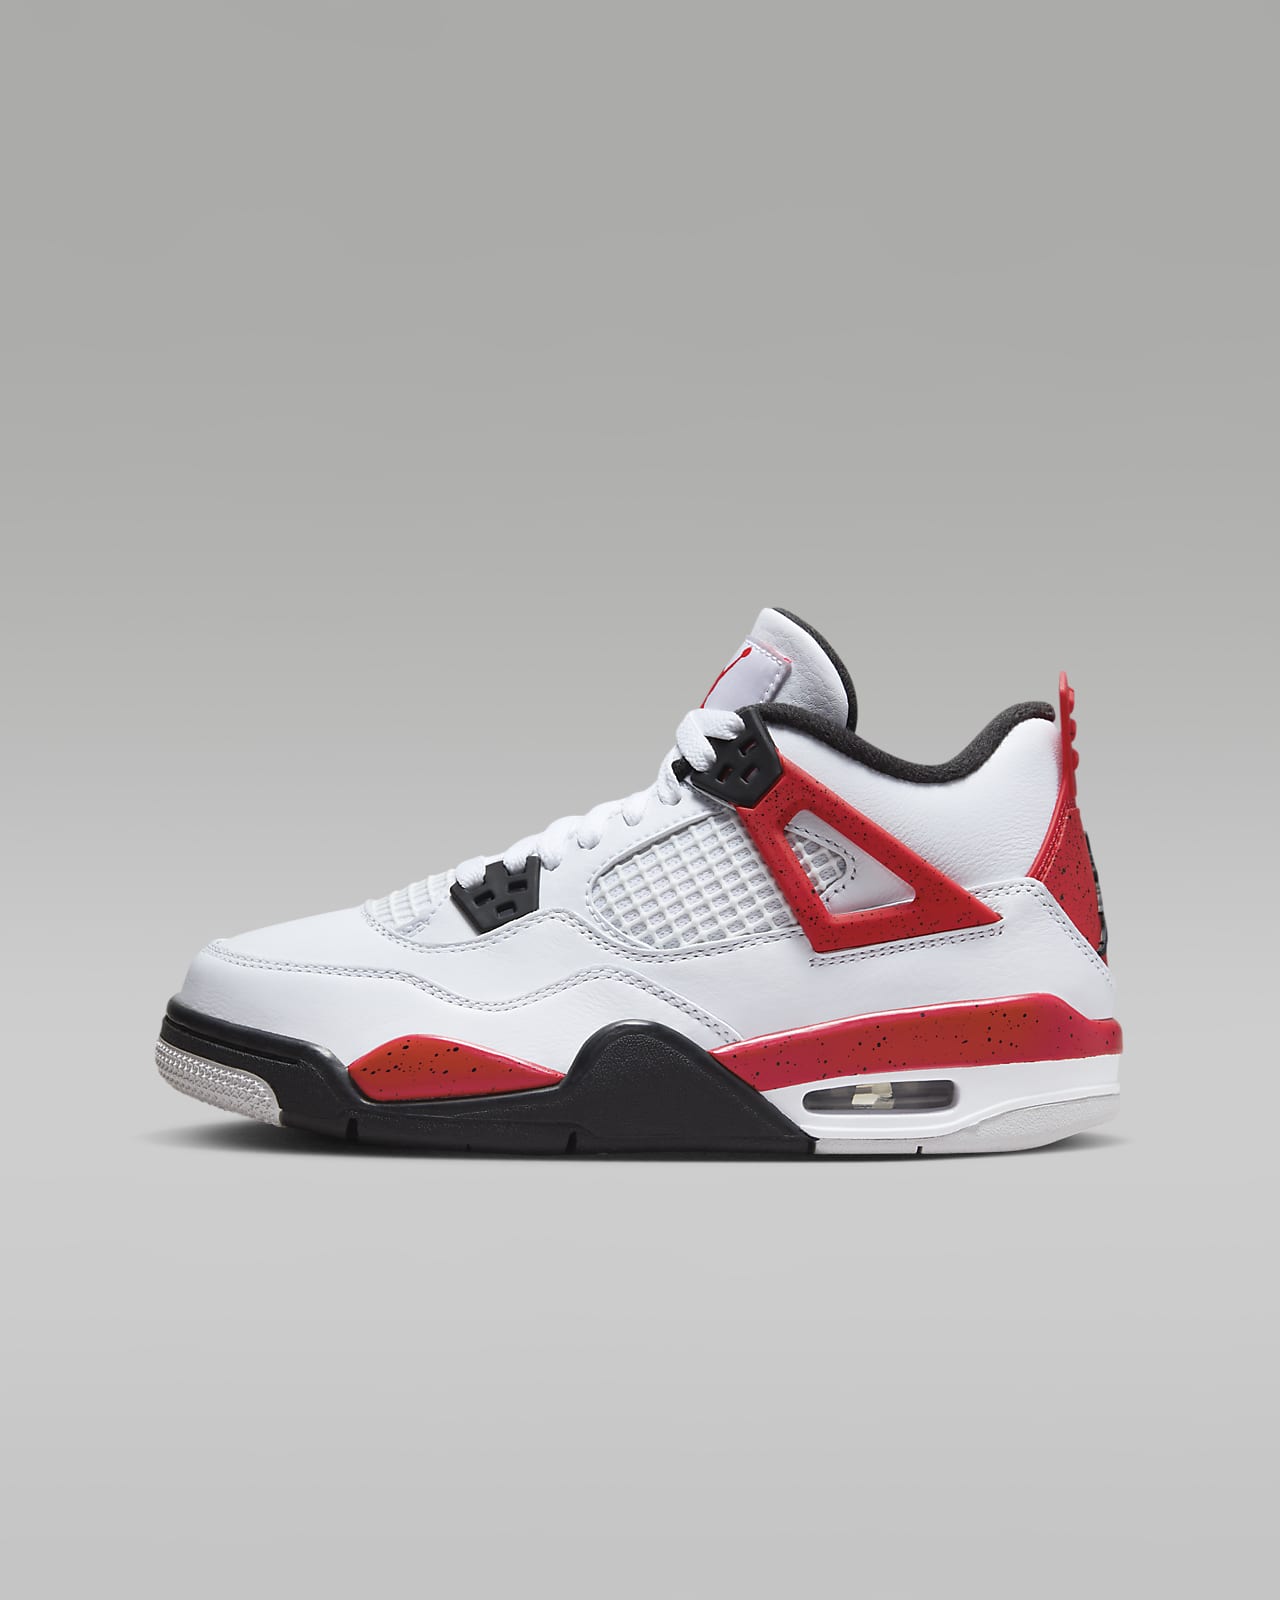 Pouch Ten Stop by to know Air Jordan 4 Retro Big Kids' Shoes. Nike.com